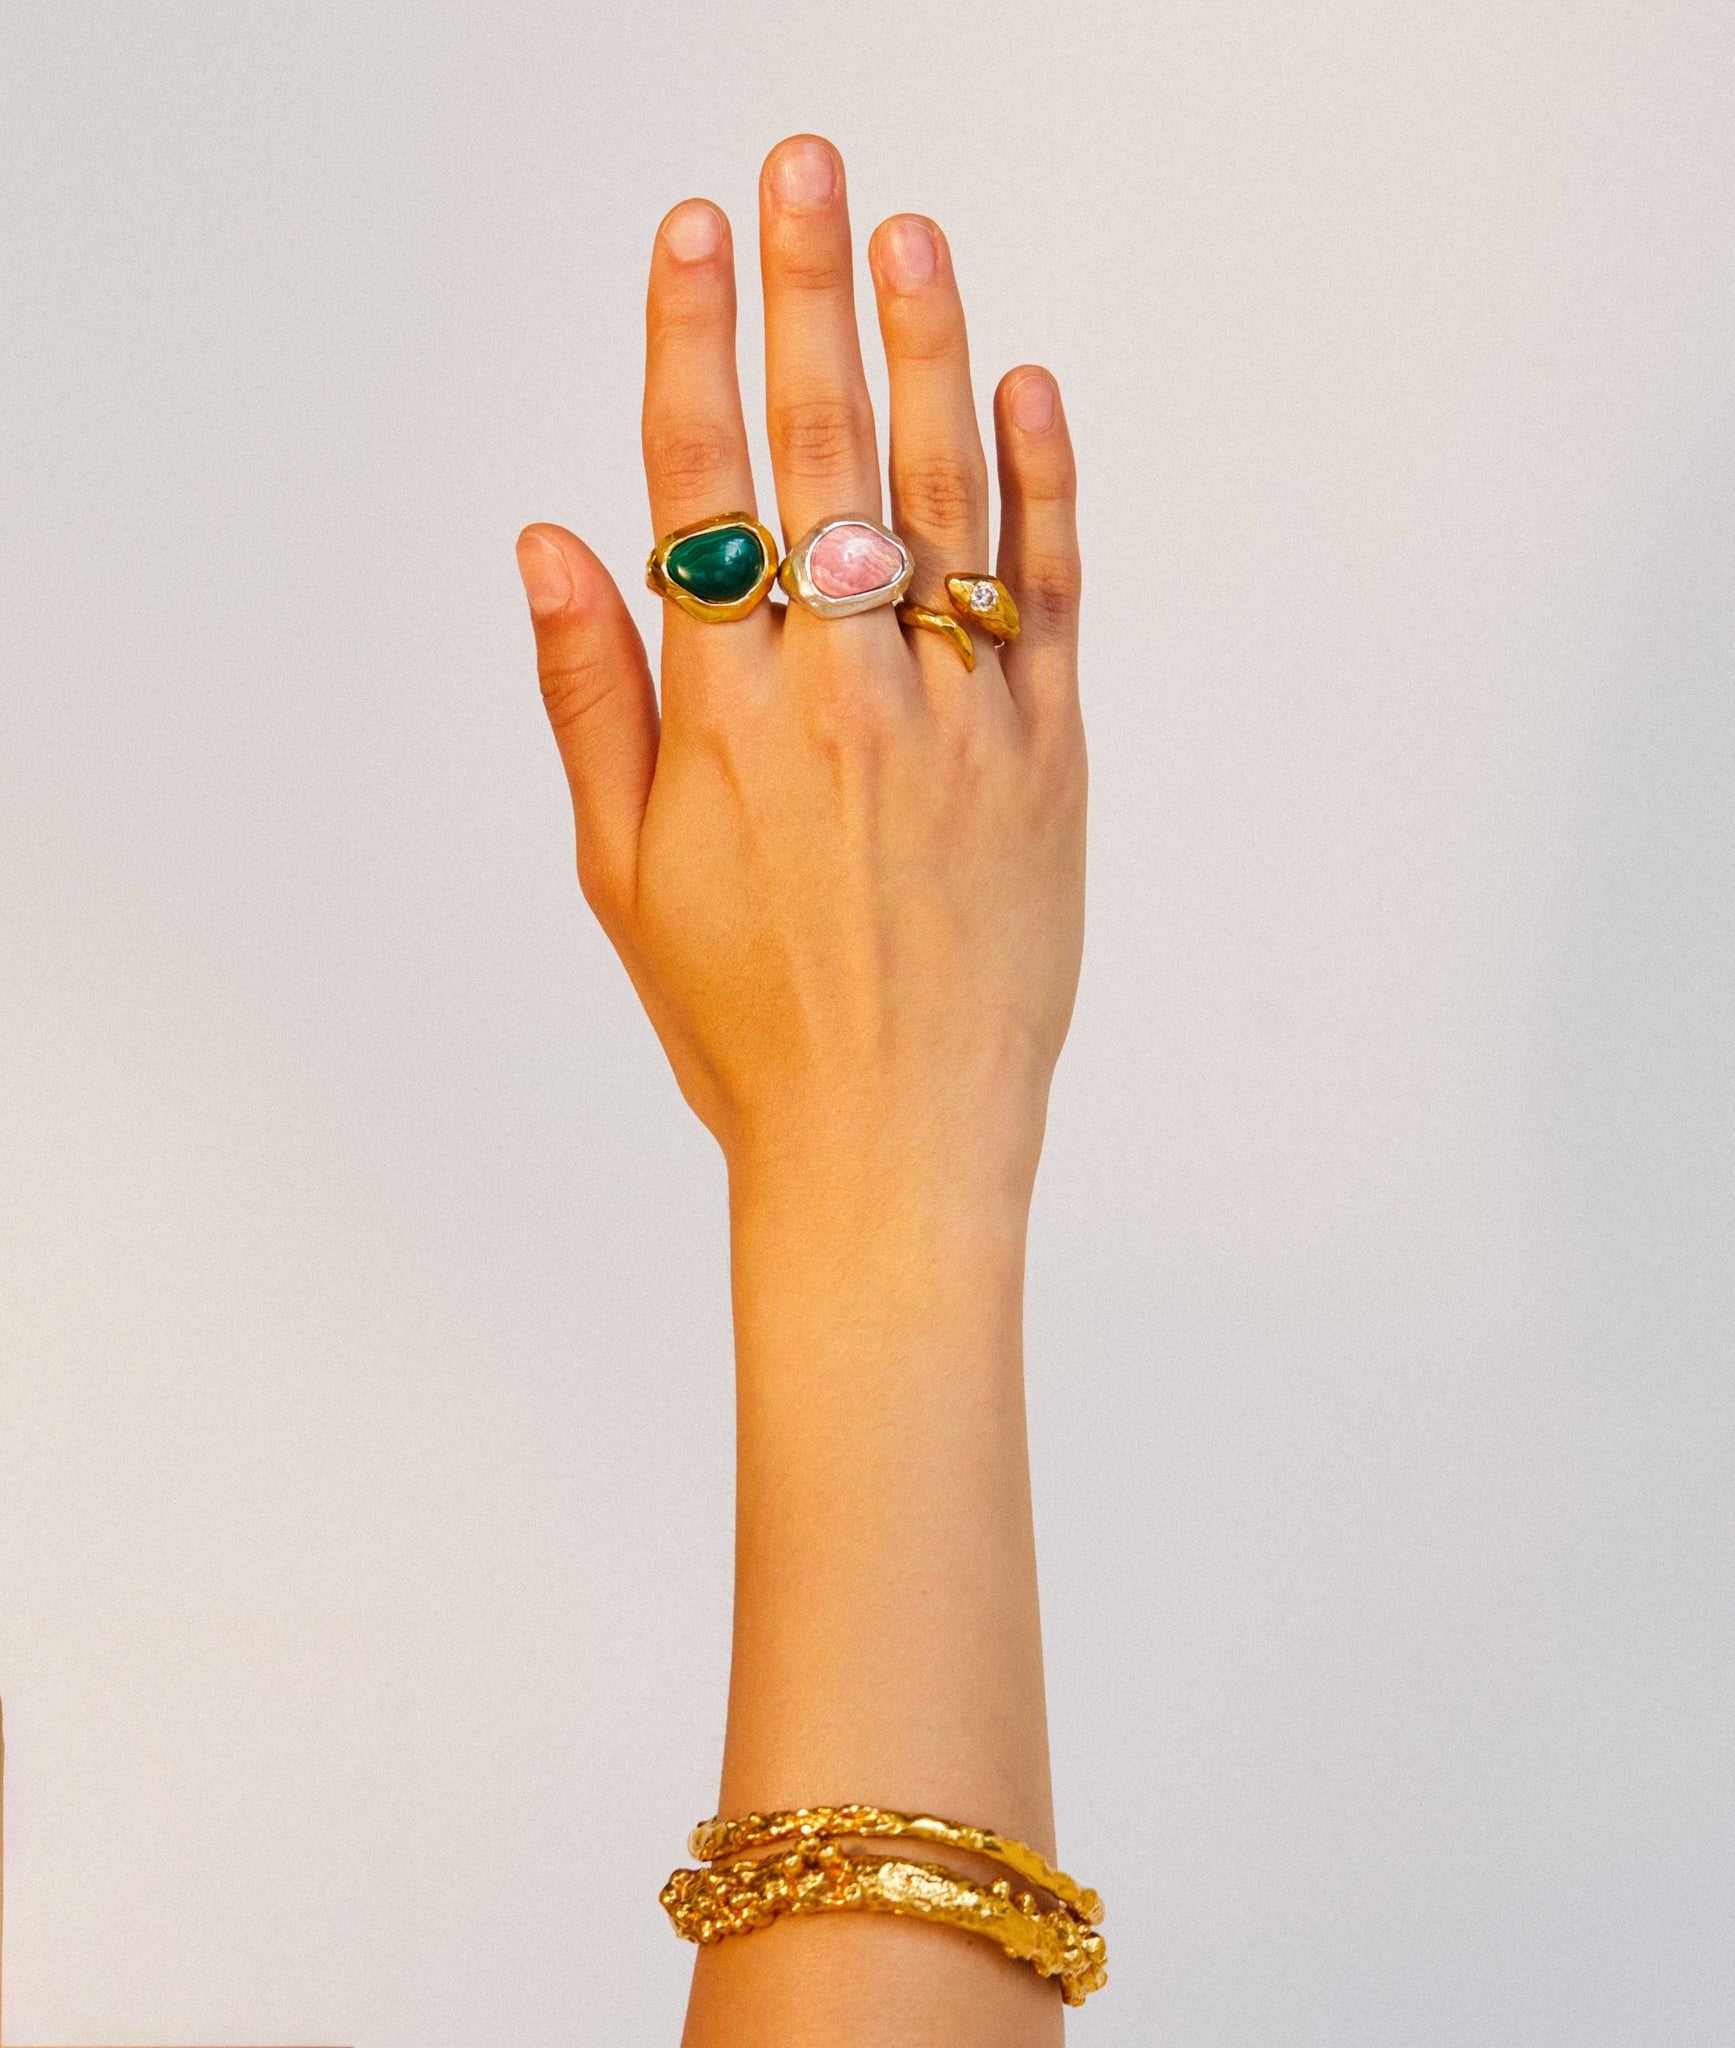 Bloomingdale's Diamond and Malachite Reversible Ring in 14K Yellow Gold -  100% Exclusive RTving in March 2022- will connect new image to UPC & PID |  Bloomingdale's